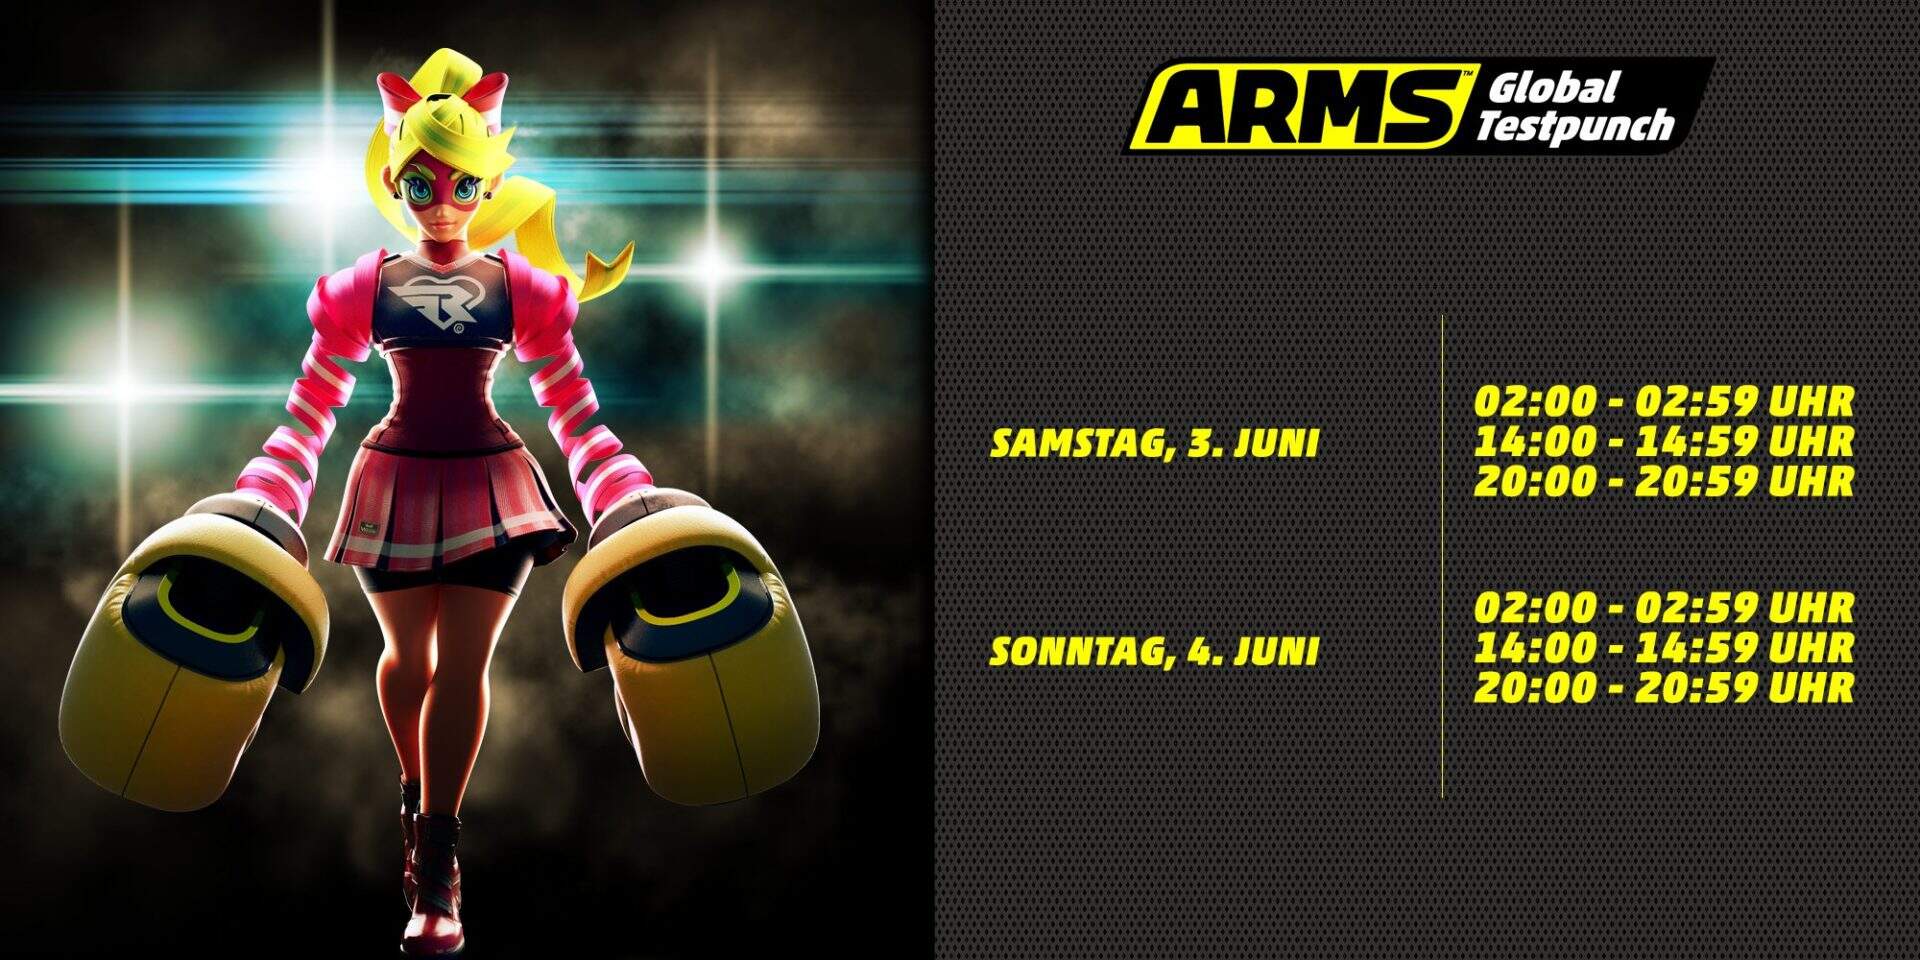 ARMS Global Testpunch